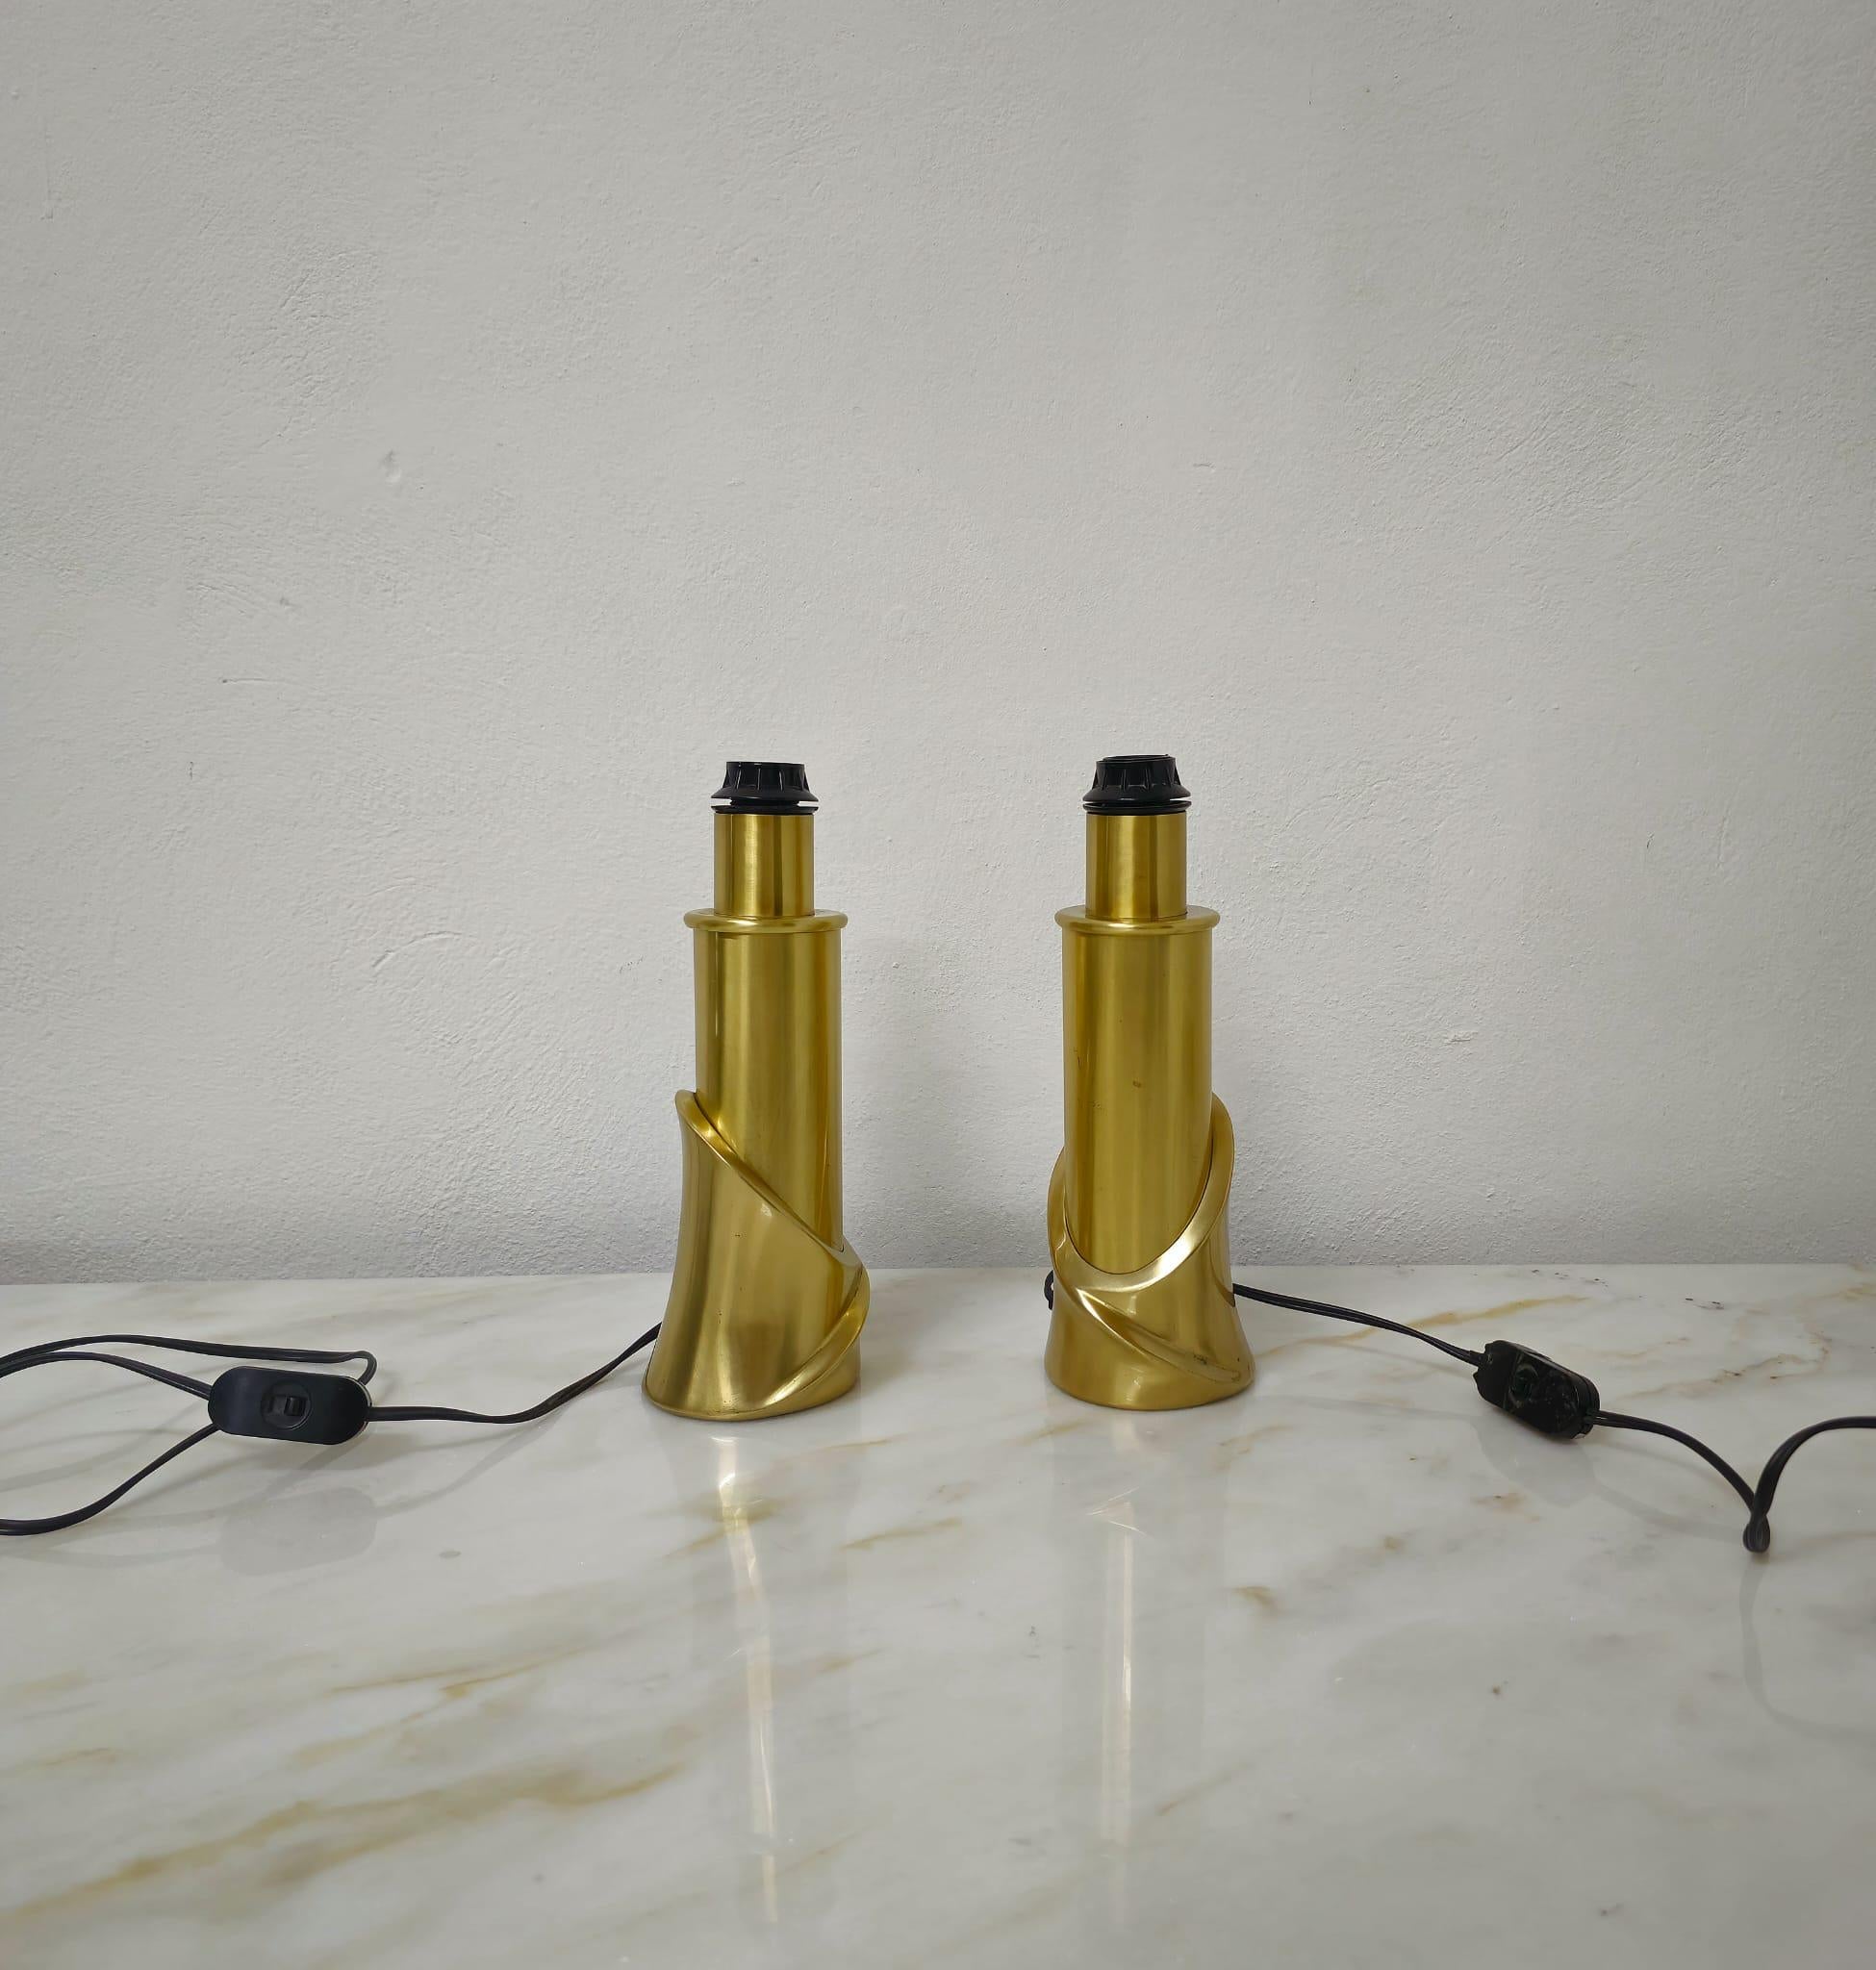 Pair of brass table/bedside lamps, attributed to Luciano Frigerio, Italy, 1970s
Excellent condition, intact and working. Very small signs of aging. E 27 lamp socket. They have always belonged to my family, purchased by my grandparents in 1973.